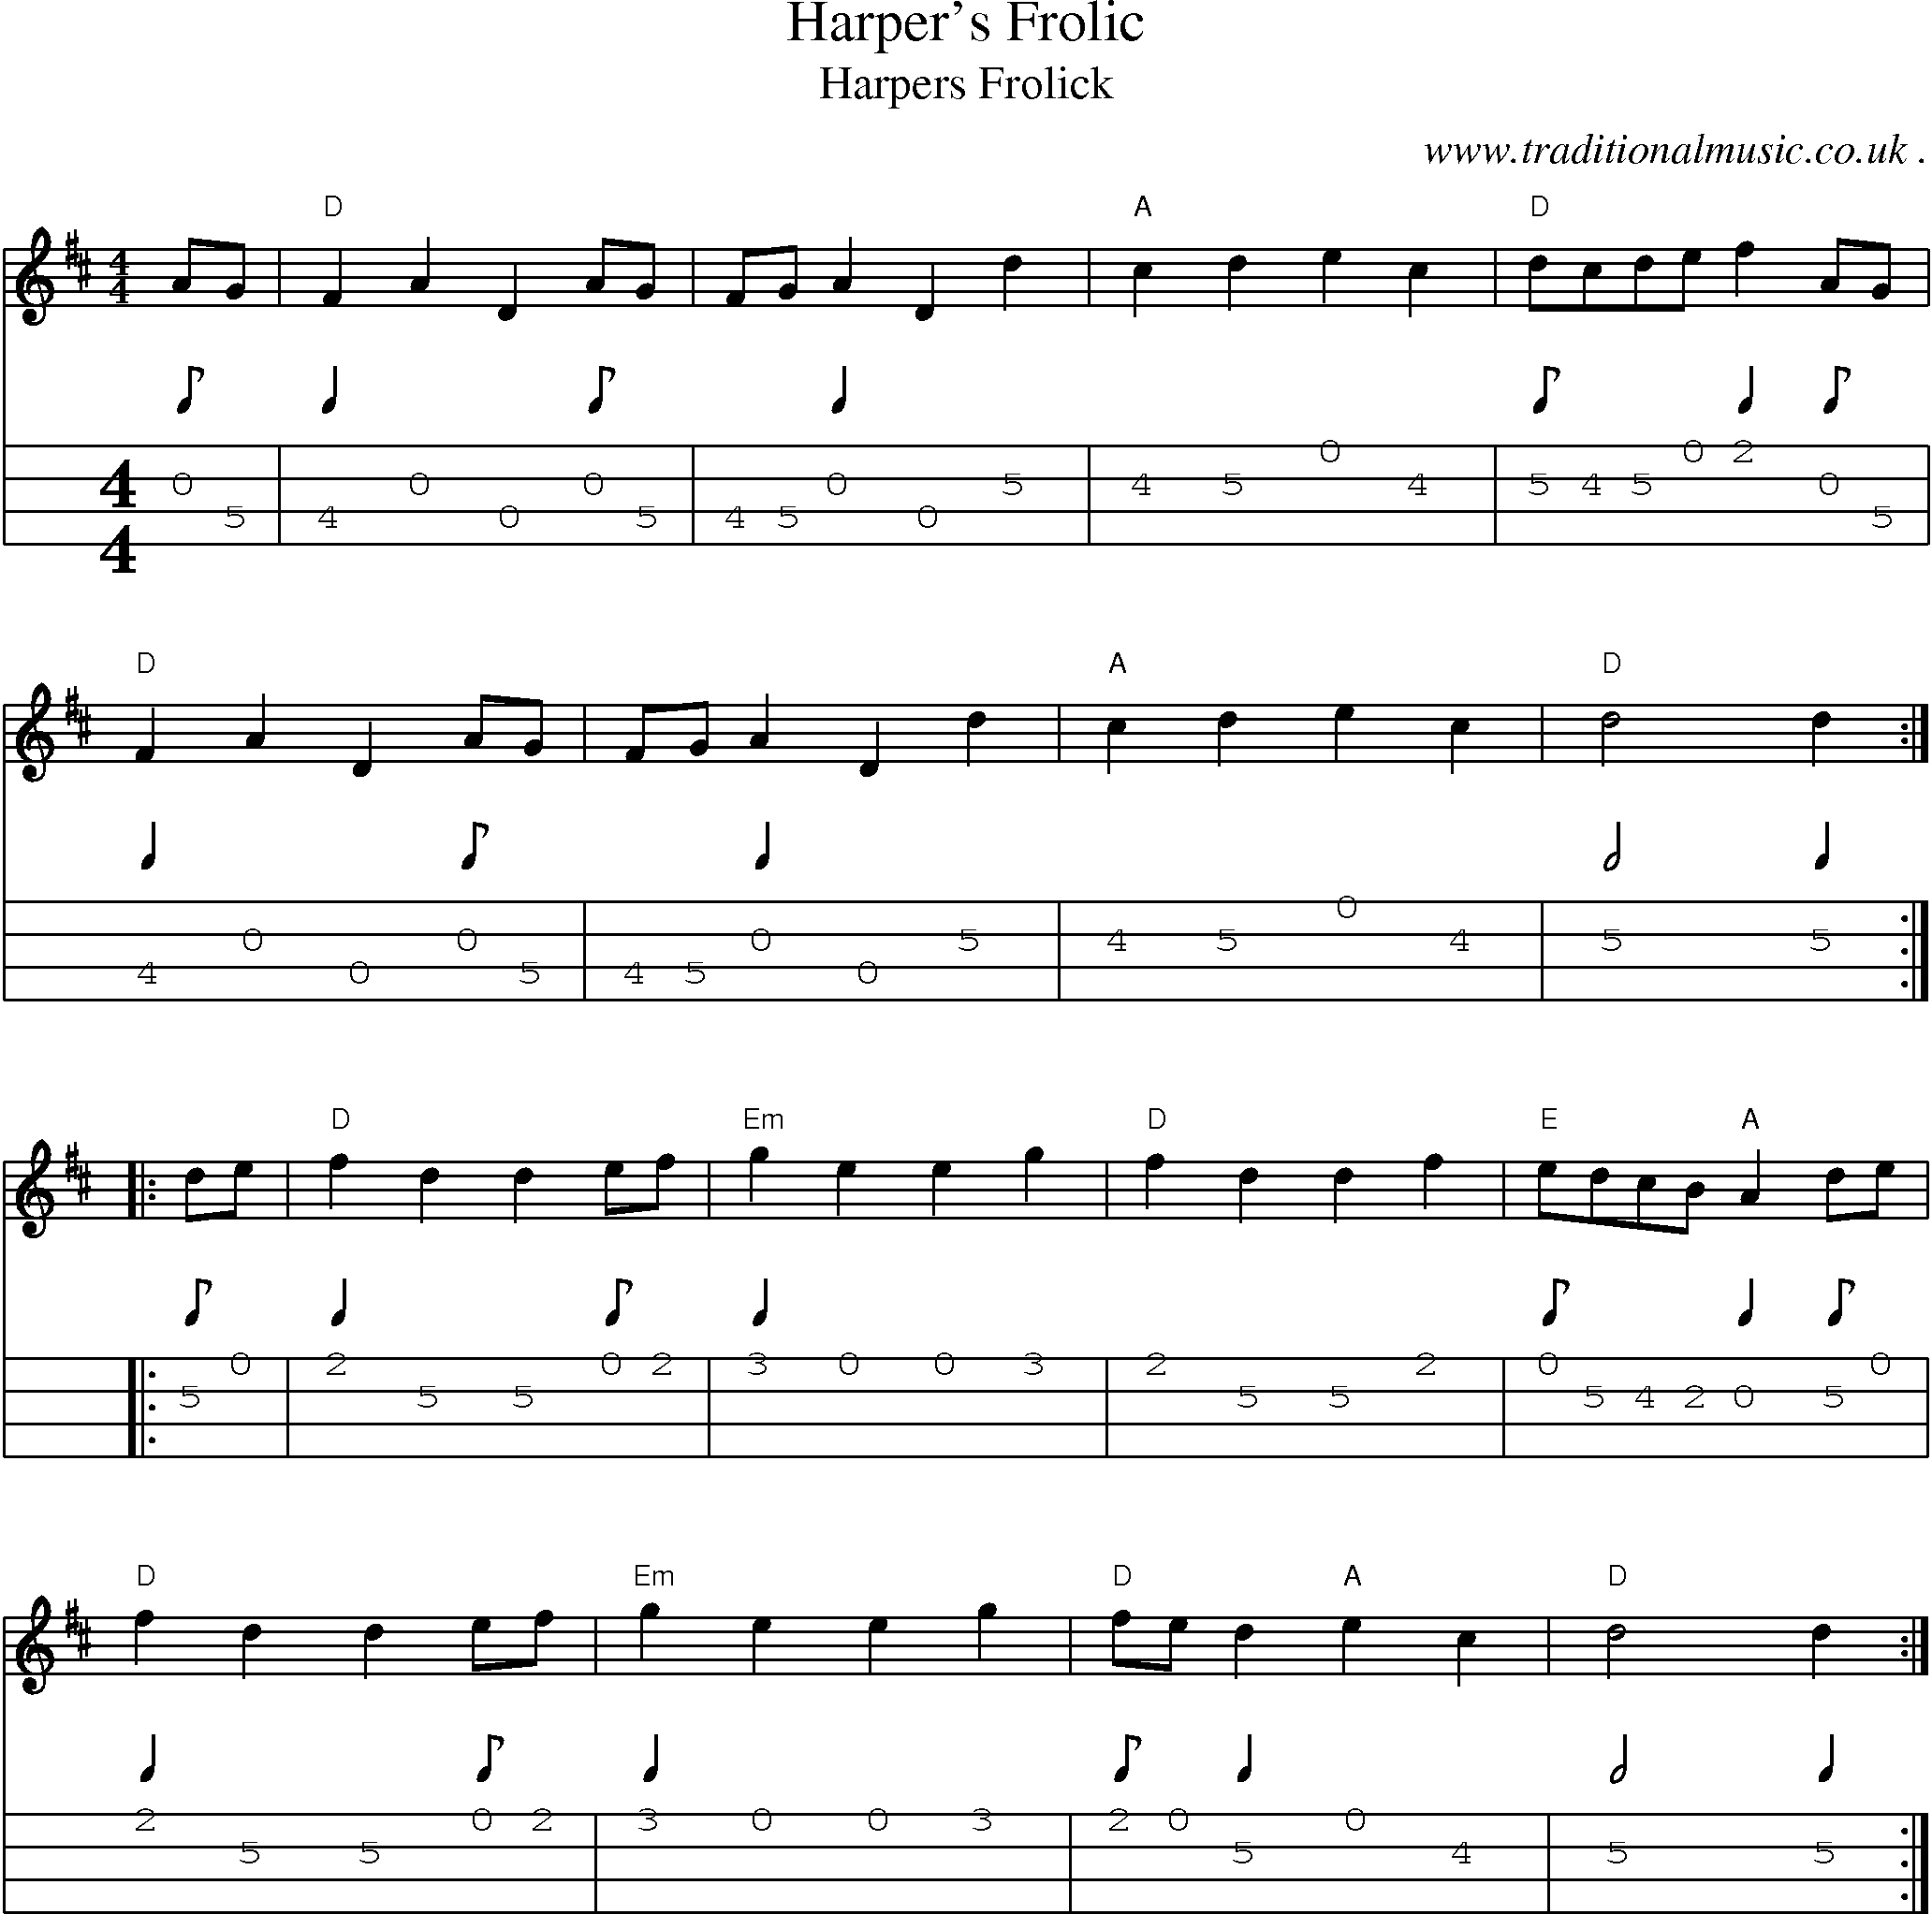 Music Score and Guitar Tabs for Harpers Frolic1